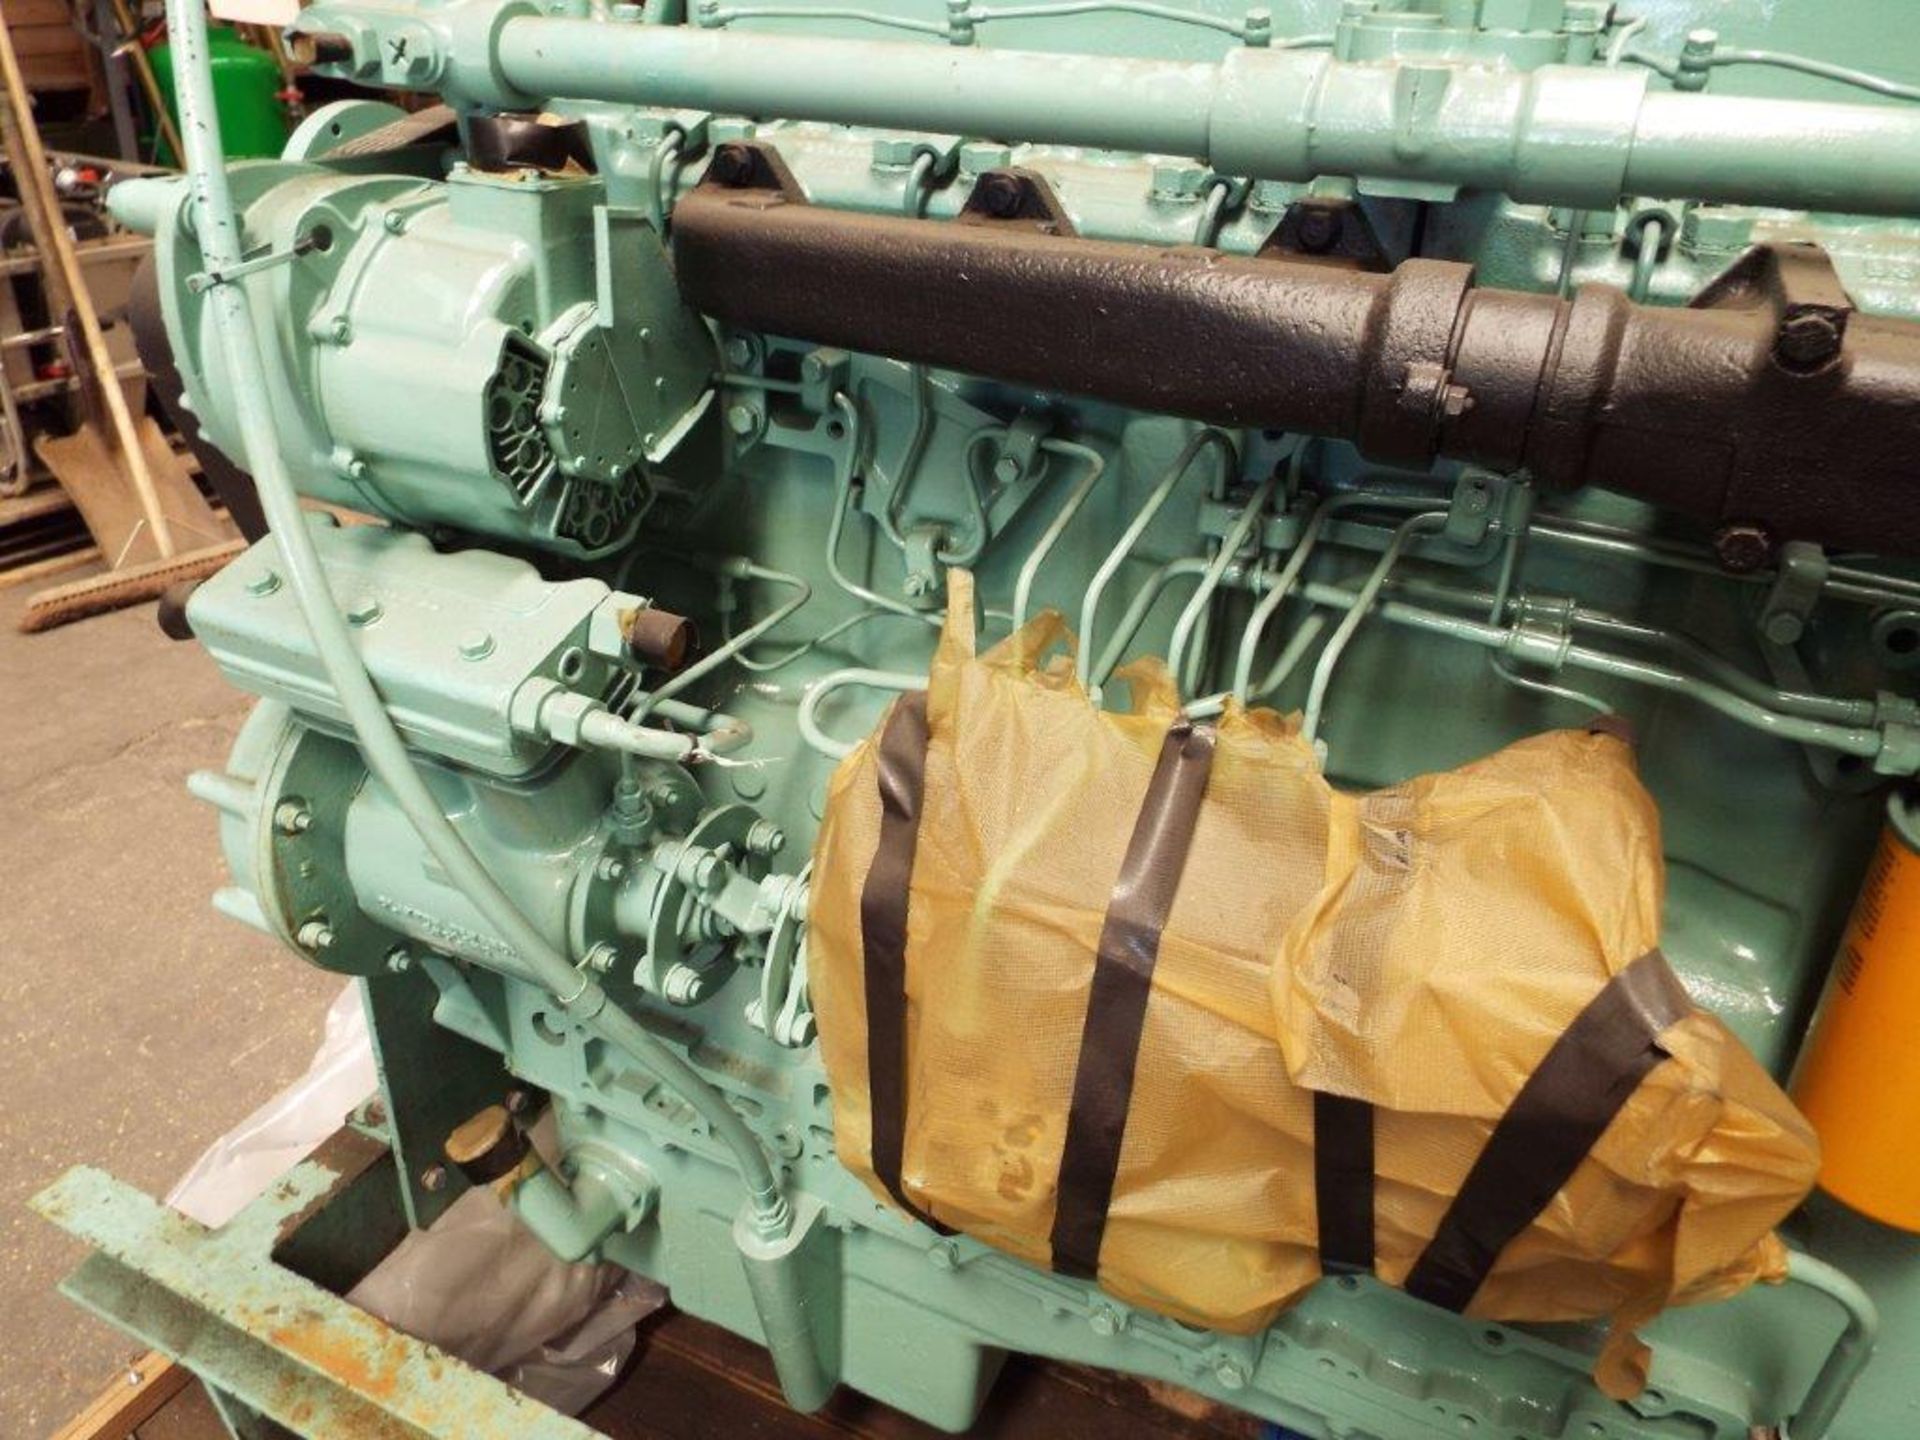 A1 Reconditioned Rolls Royce/Perkins 290L Straight 6 Turbo Diesel Engine for Foden Recovery Vehicles - Image 12 of 20